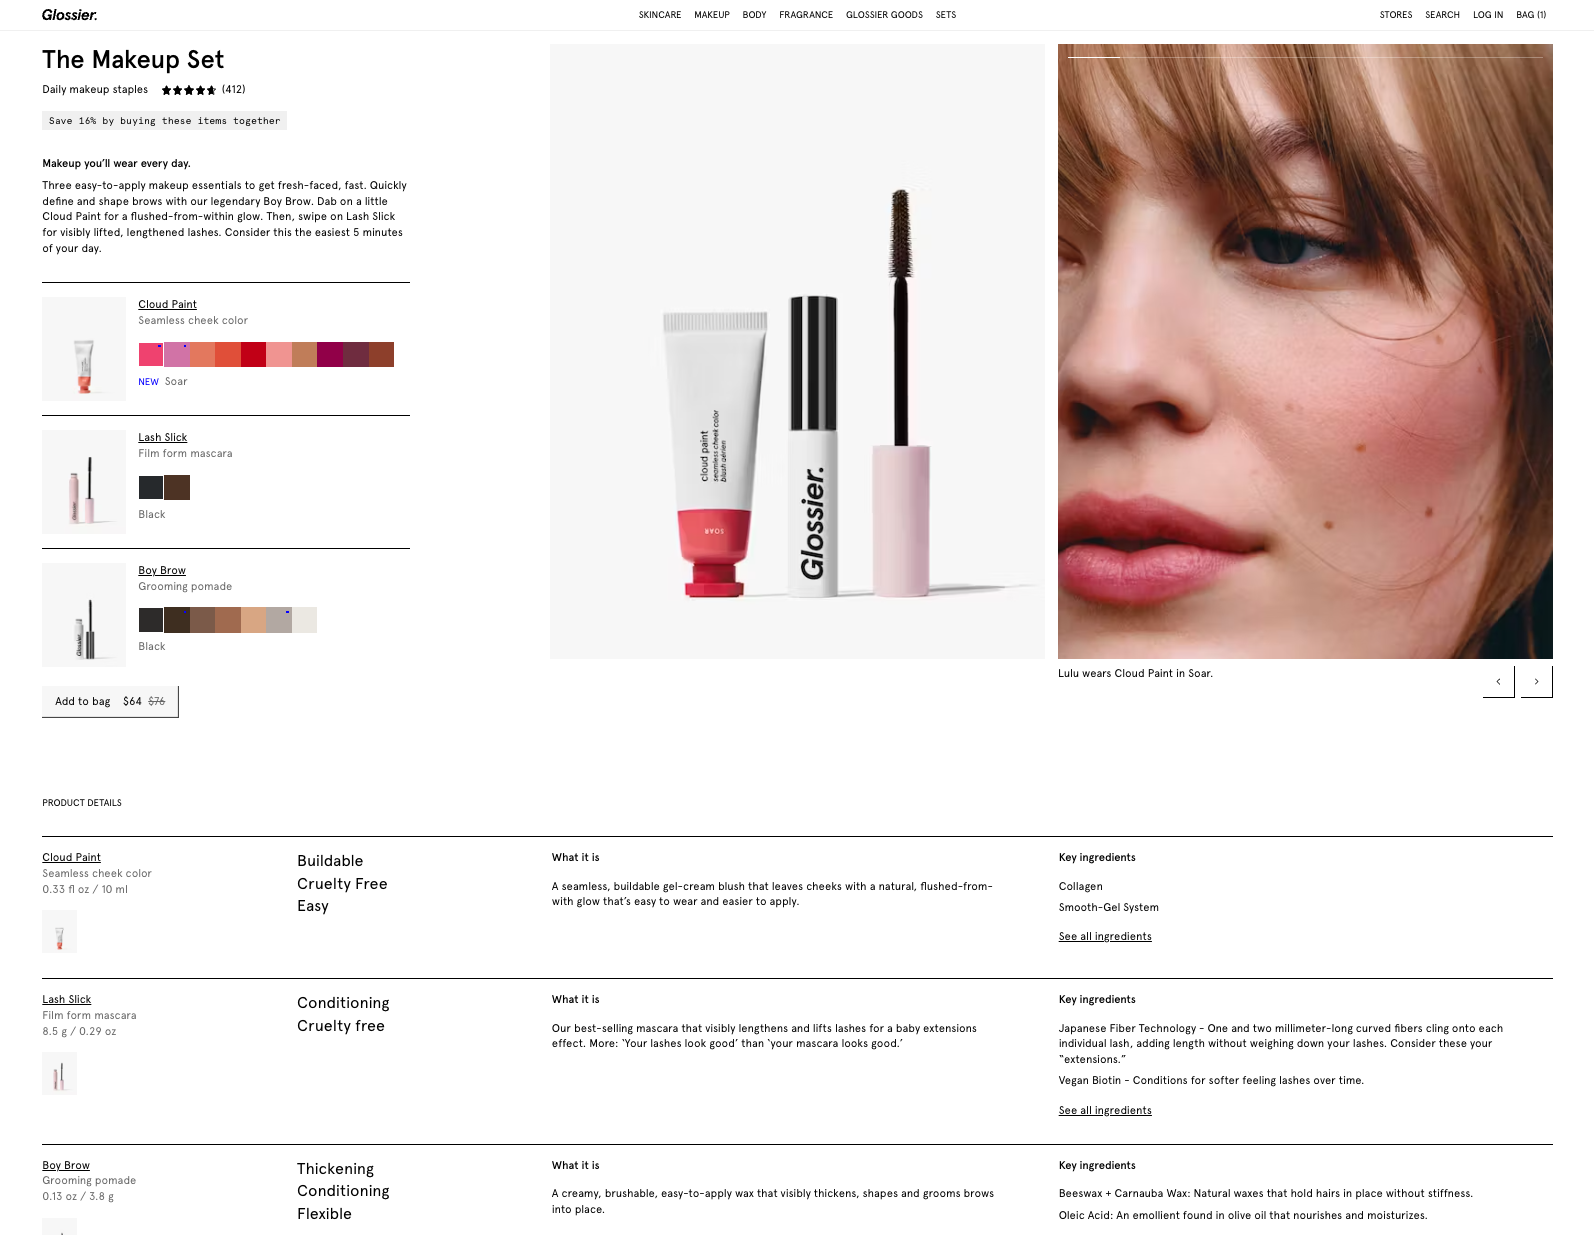 Screenshot of Glossier's product bundle page.